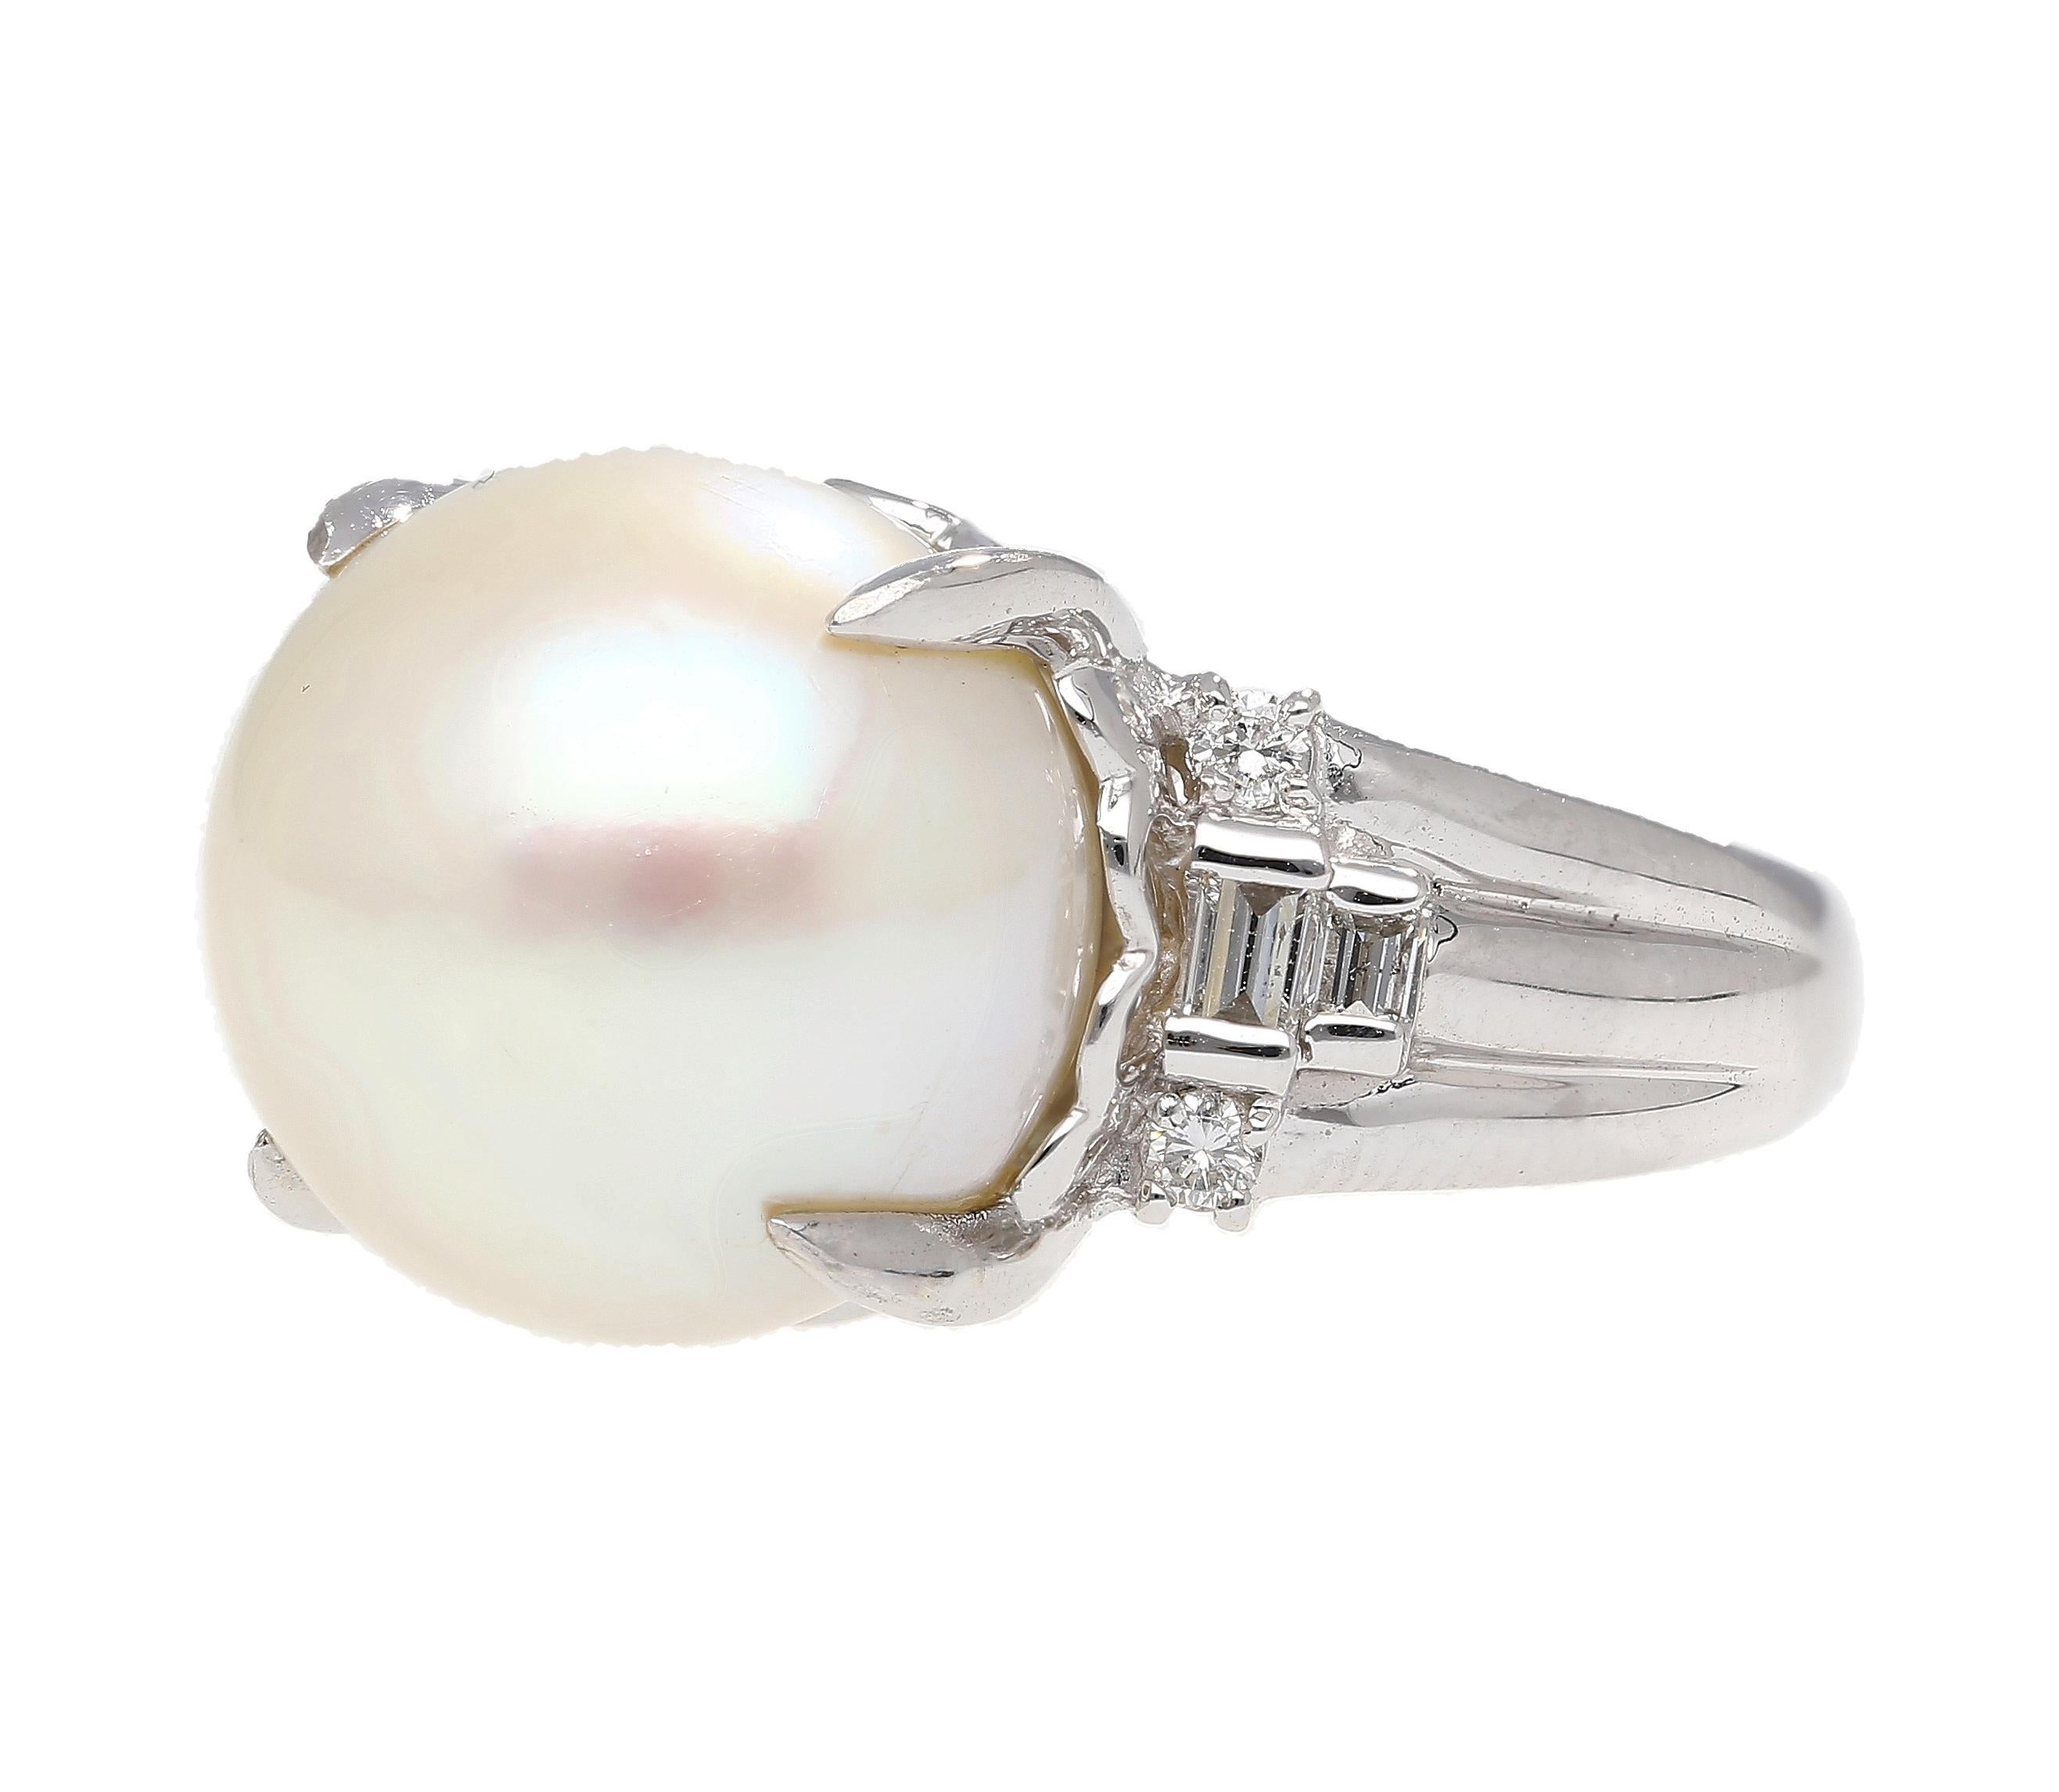 15mm South Sea Pearl and Diamond Platinum Cocktail Ring with Heart Shape Design In New Condition For Sale In Miami, FL